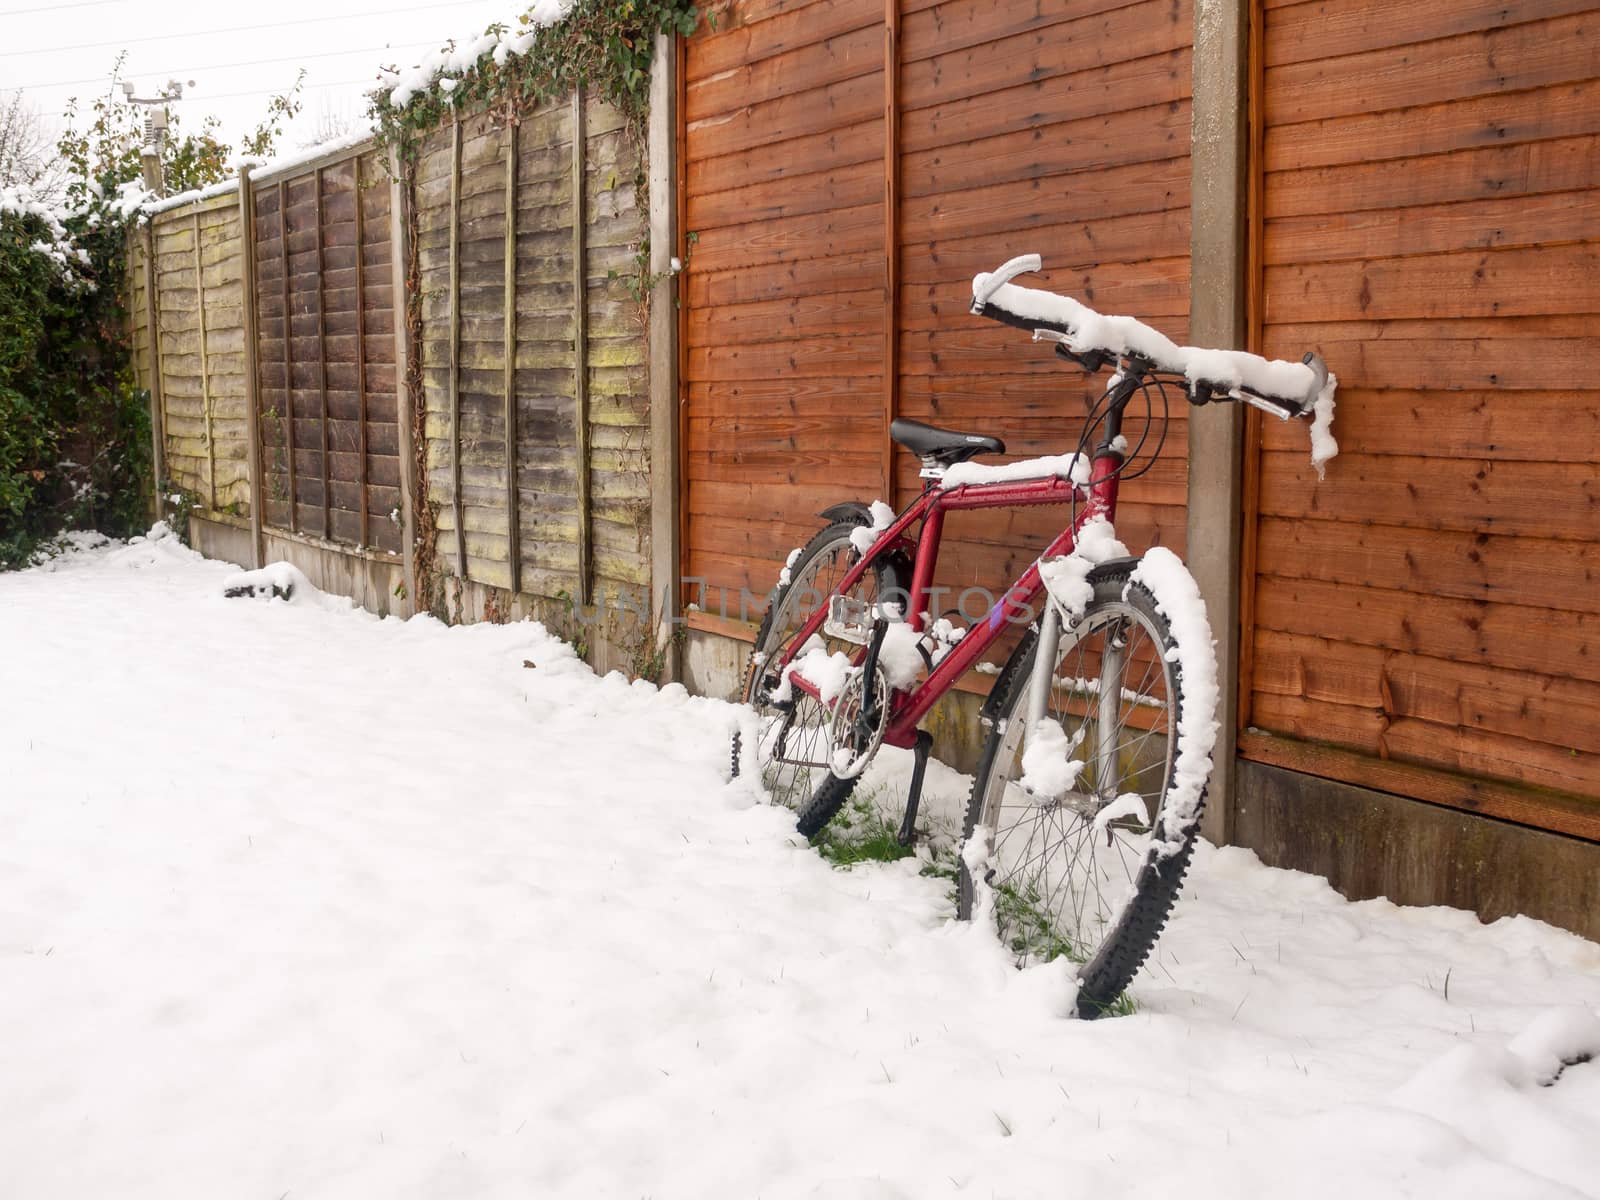 red bike cover in snow rested again fence snow covering ground winter; essex; england; uk